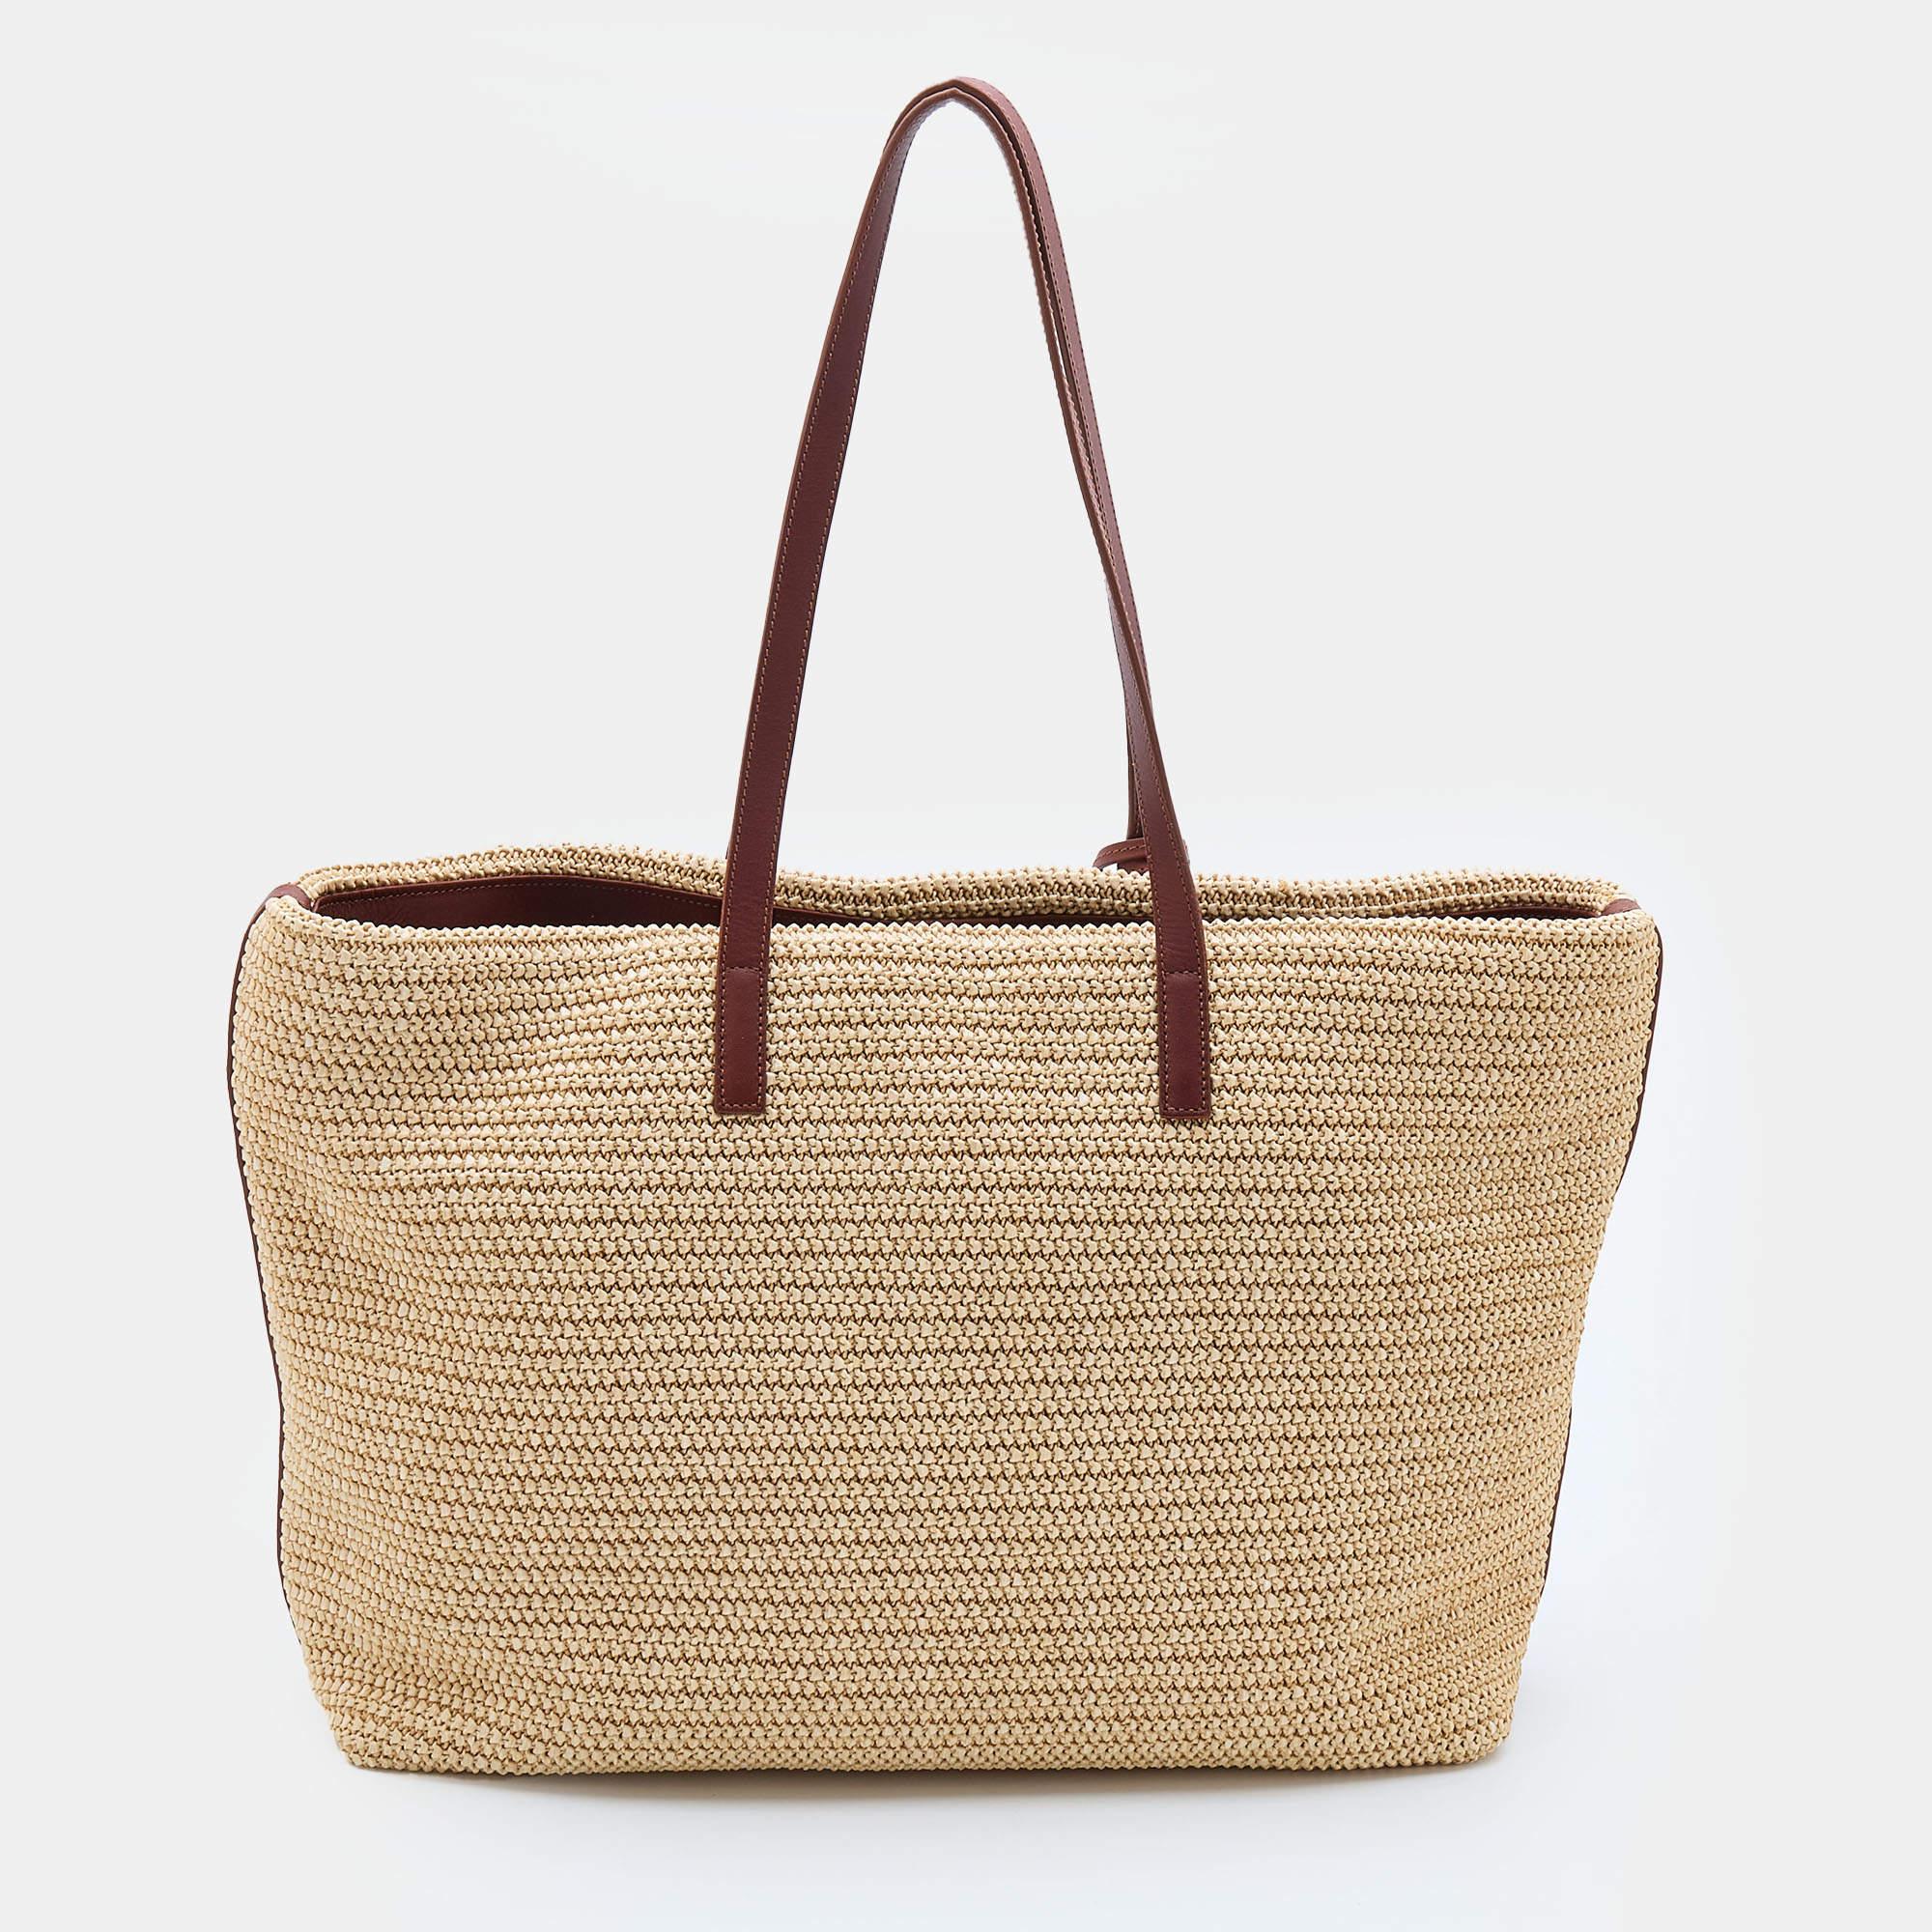 This Saint Laurent tote in beige woven raffia and brown leather may be perfect for vacations and beach dates, but it holds the power to effortlessly elevate chic tailoring too. It has a spacious size, with two shoulder handles and a tassel